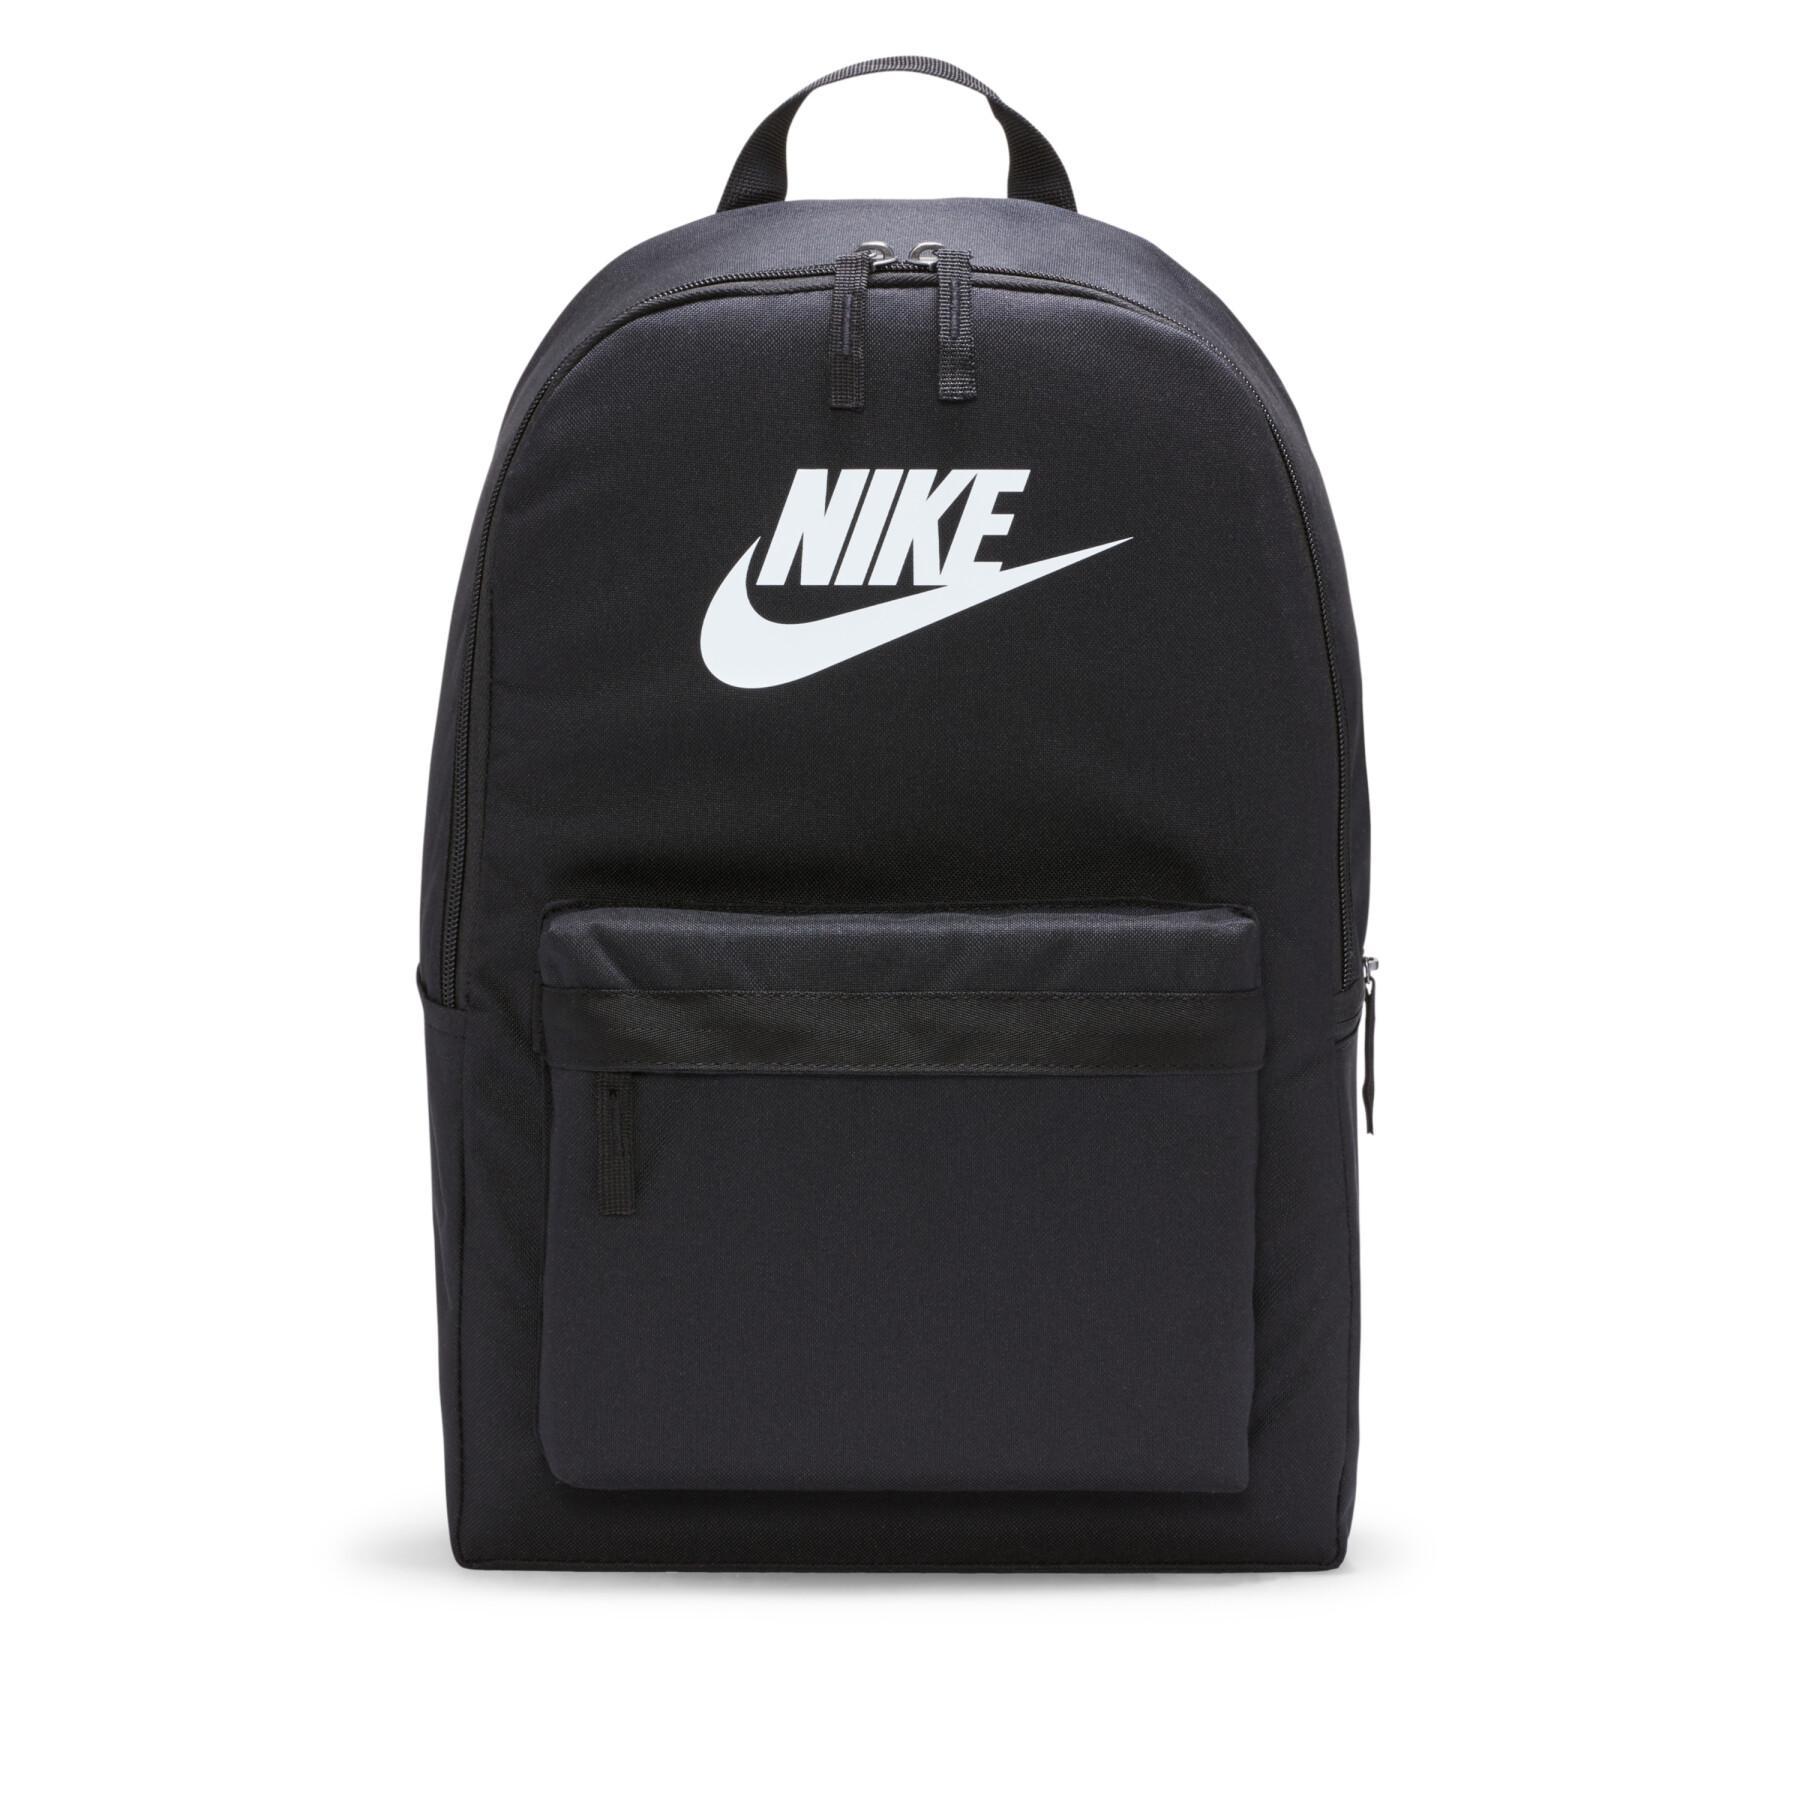 Sac à dos Nike heritage - Nike - Marques - Equipements